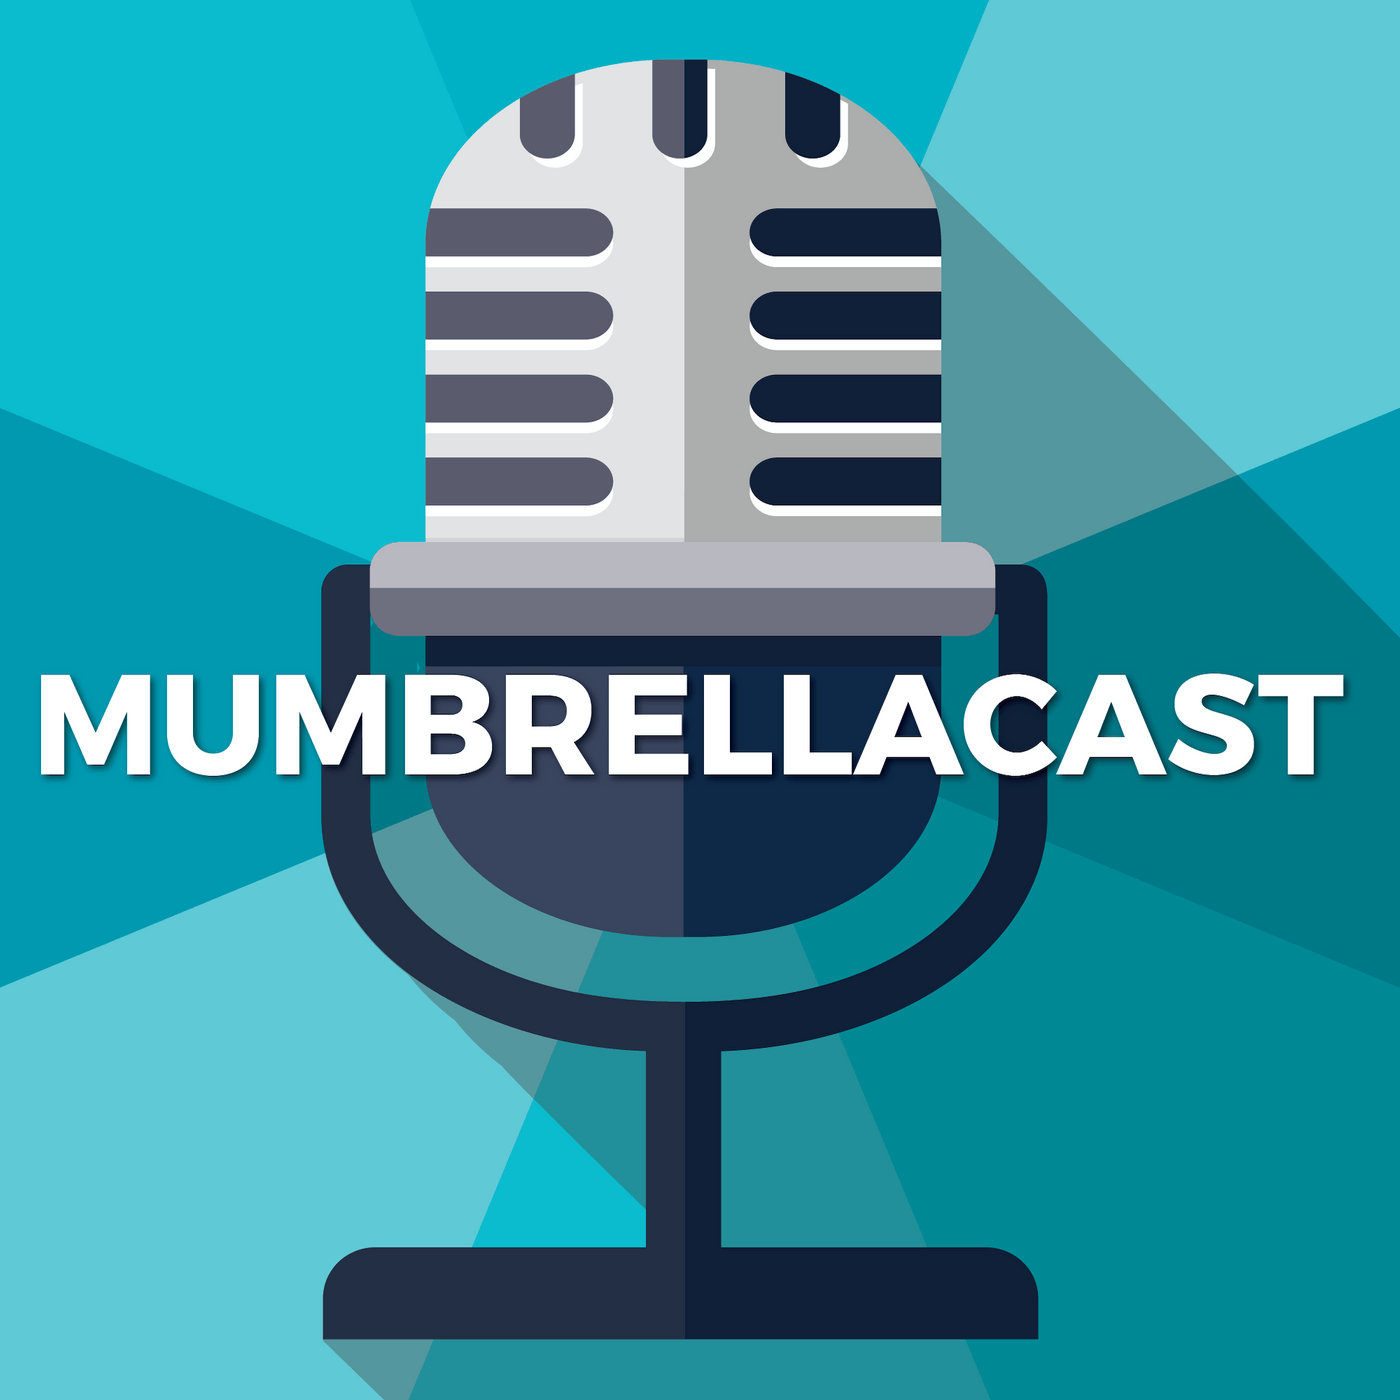 Mumbrellacast Live: Mim Haysom and Nick Garrett on the evolving CMO and why we should be playing a 'bigger game'